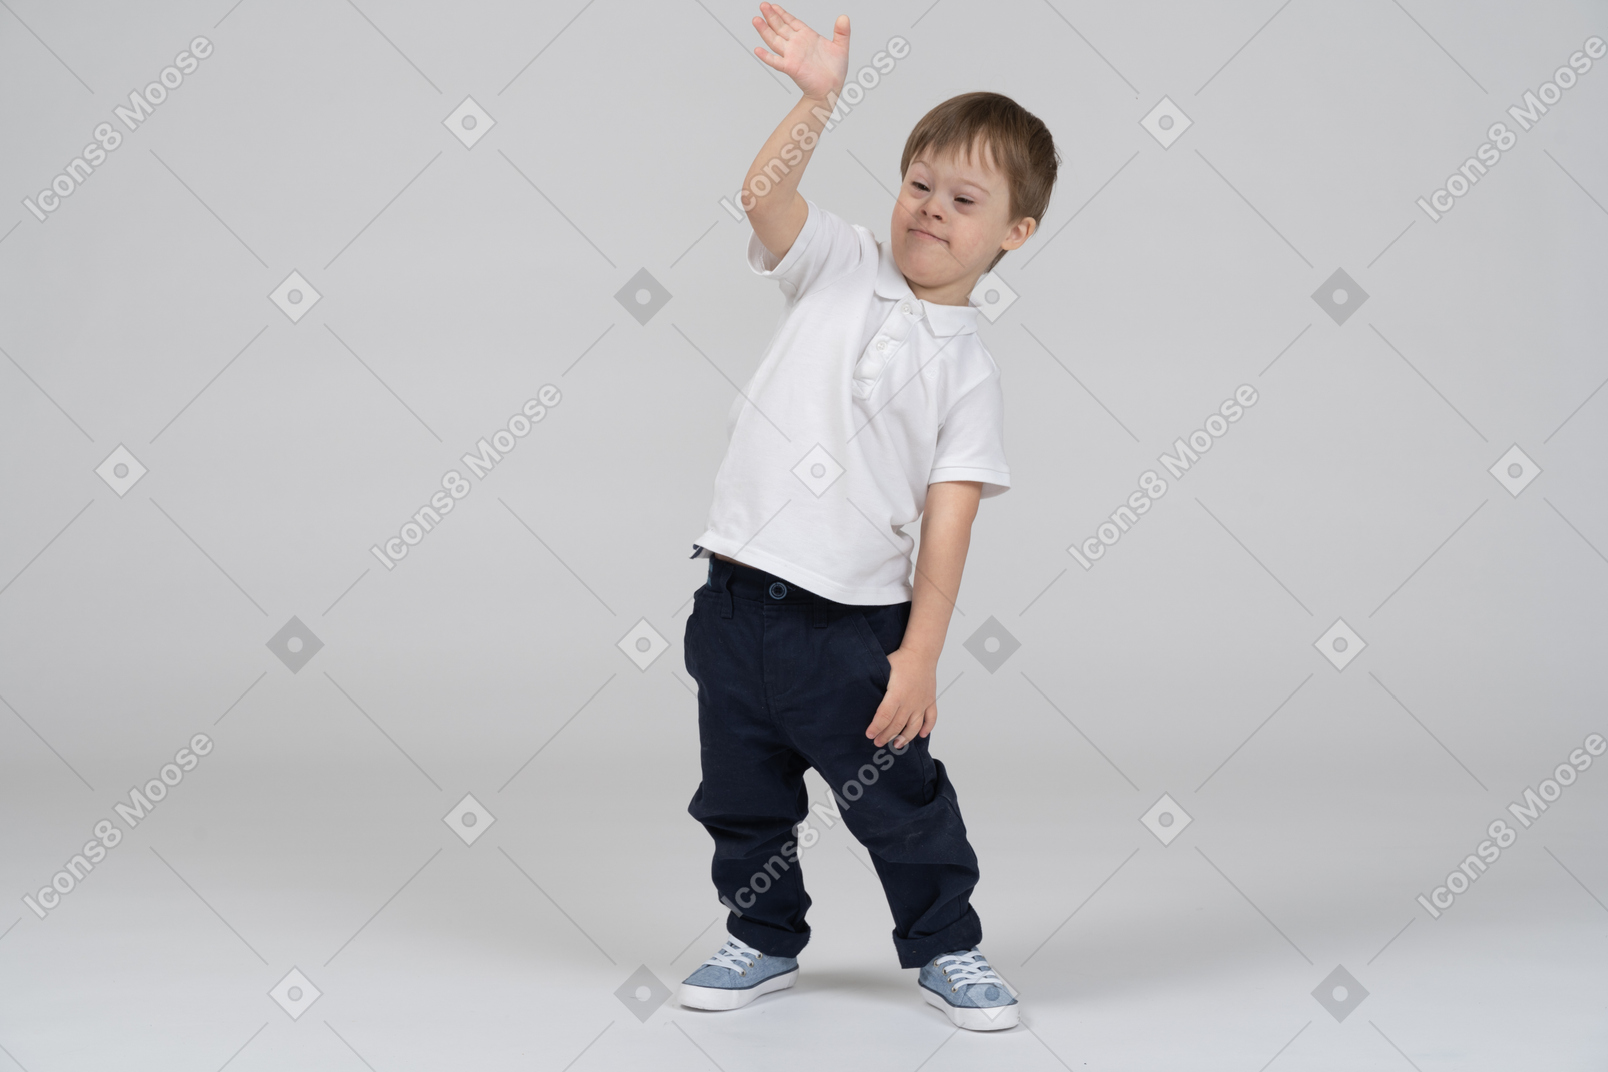 Front view of a little boy raising his hand